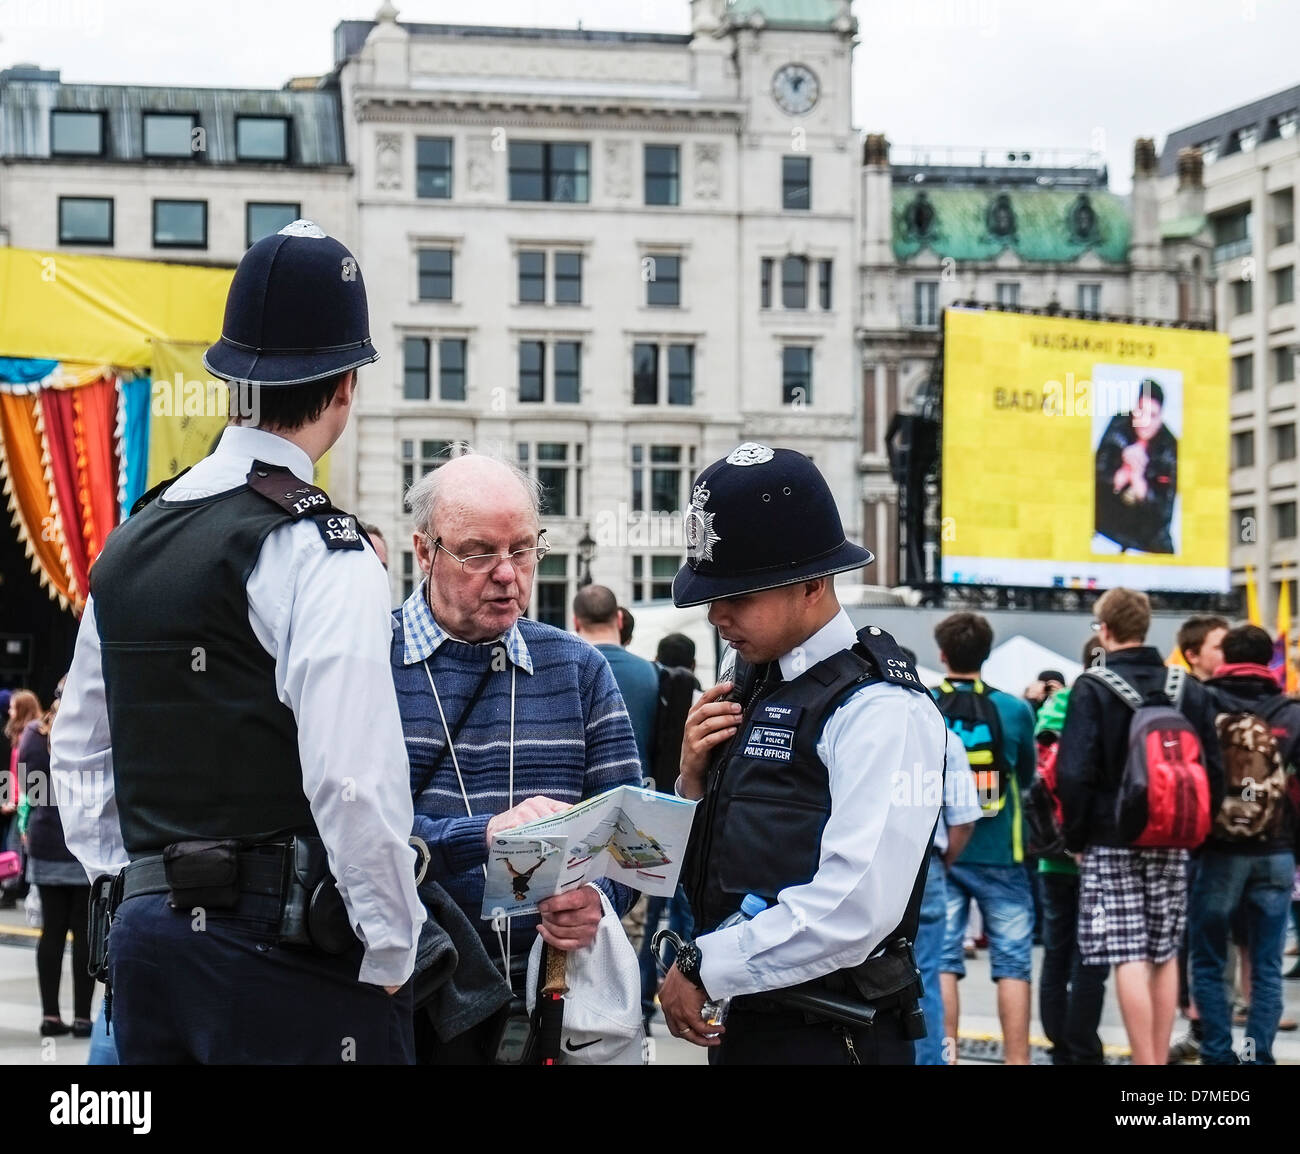 Two Metropolitan Police Officers helping a tourist. Stock Photo